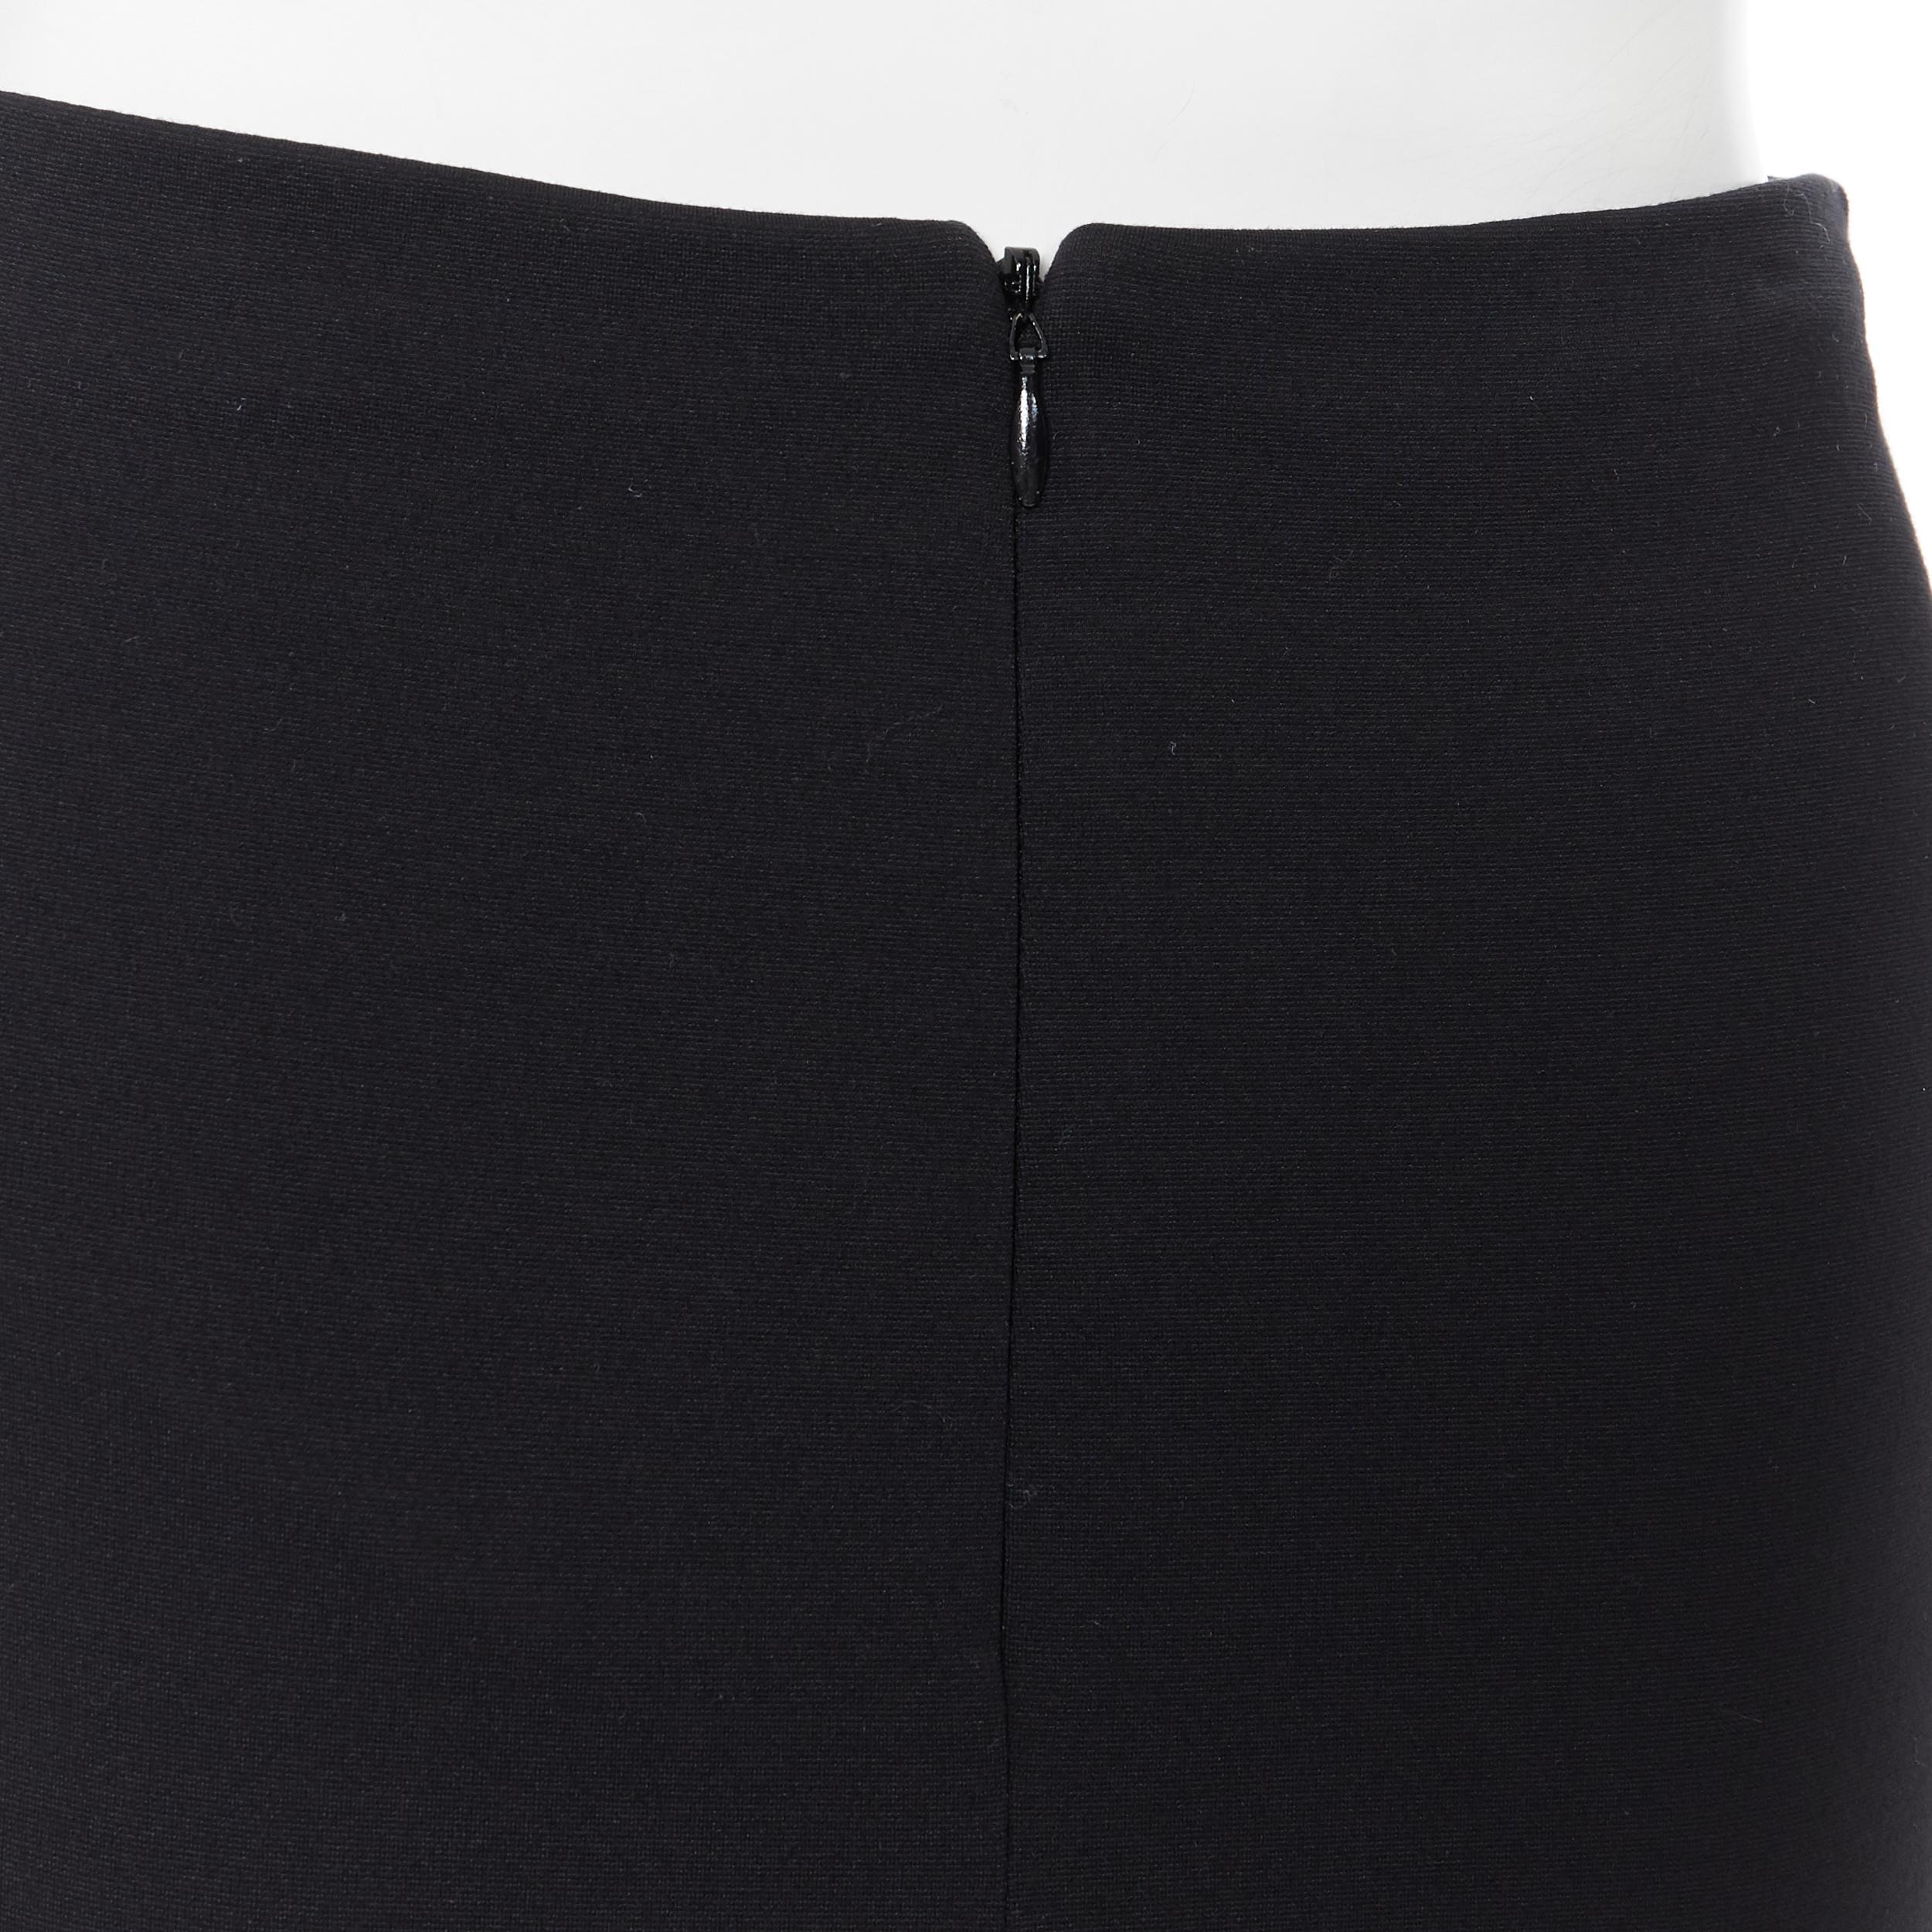 Women's T BY ALEXANDER WANG black rayon polyester center slit stretch pencil skirt S